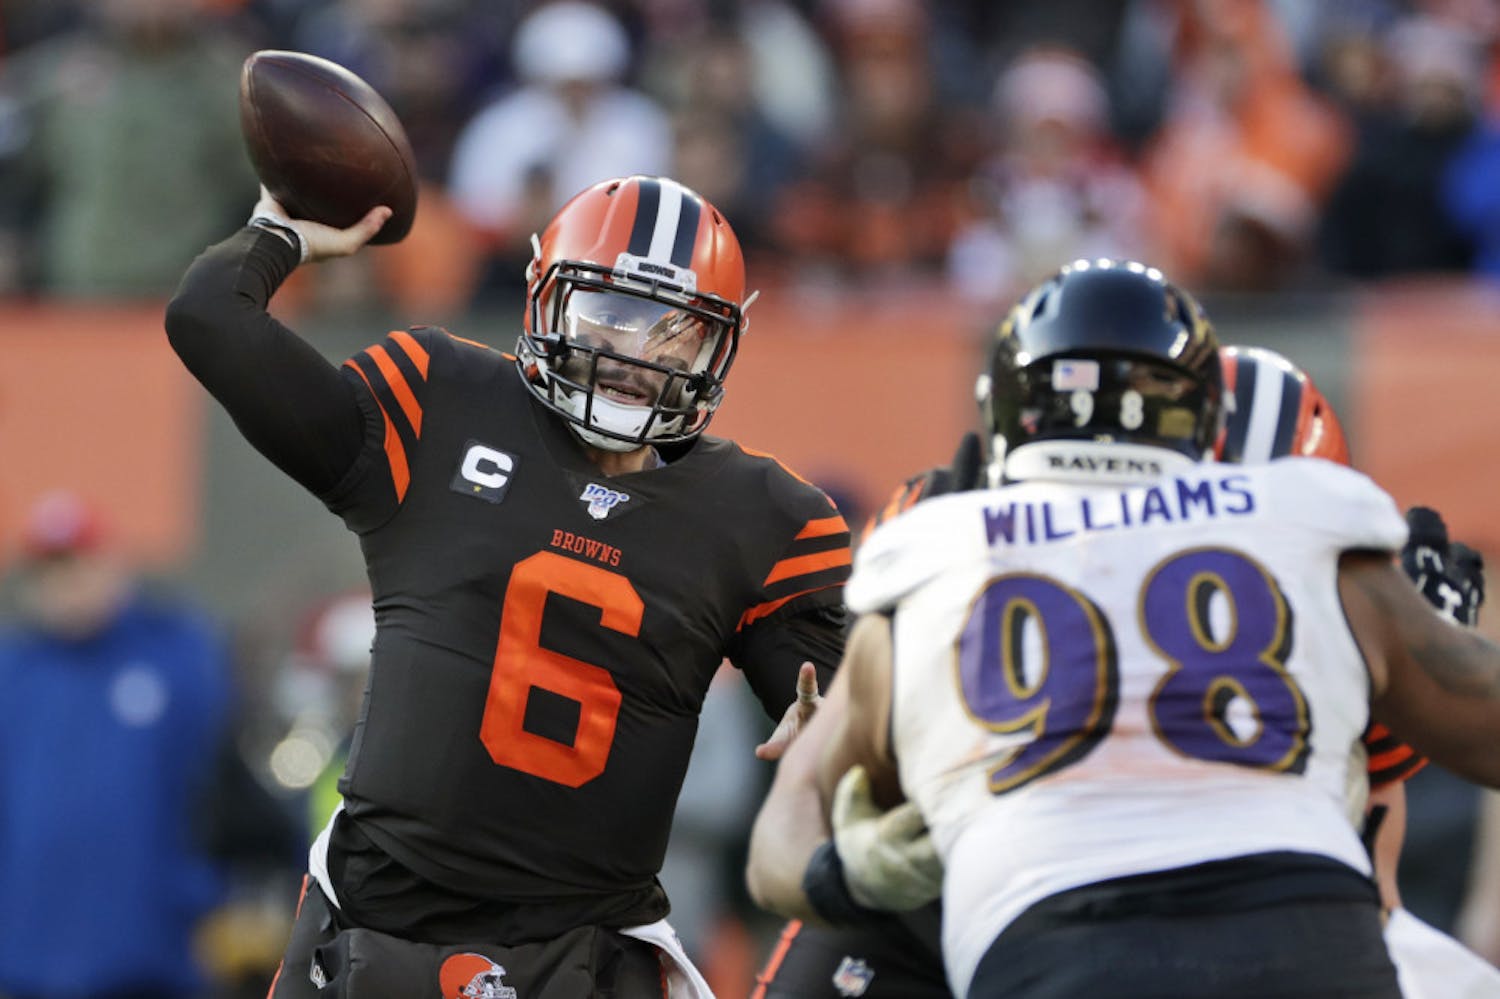 FILE - In this Sunday, Dec. 22, 2019 file photo, Cleveland Browns quarterback Baker Mayfield (6) passes against the Baltimore Ravens during the second half of an NFL football game in Cleveland. Cleveland Browns quarterback Baker Mayfield plans to kneel during the national anthem this upcoming season to support protests of social injustice, police brutality and racism, Saturday, June 13, 2020. (AP Photo/Ron Schwane, File)